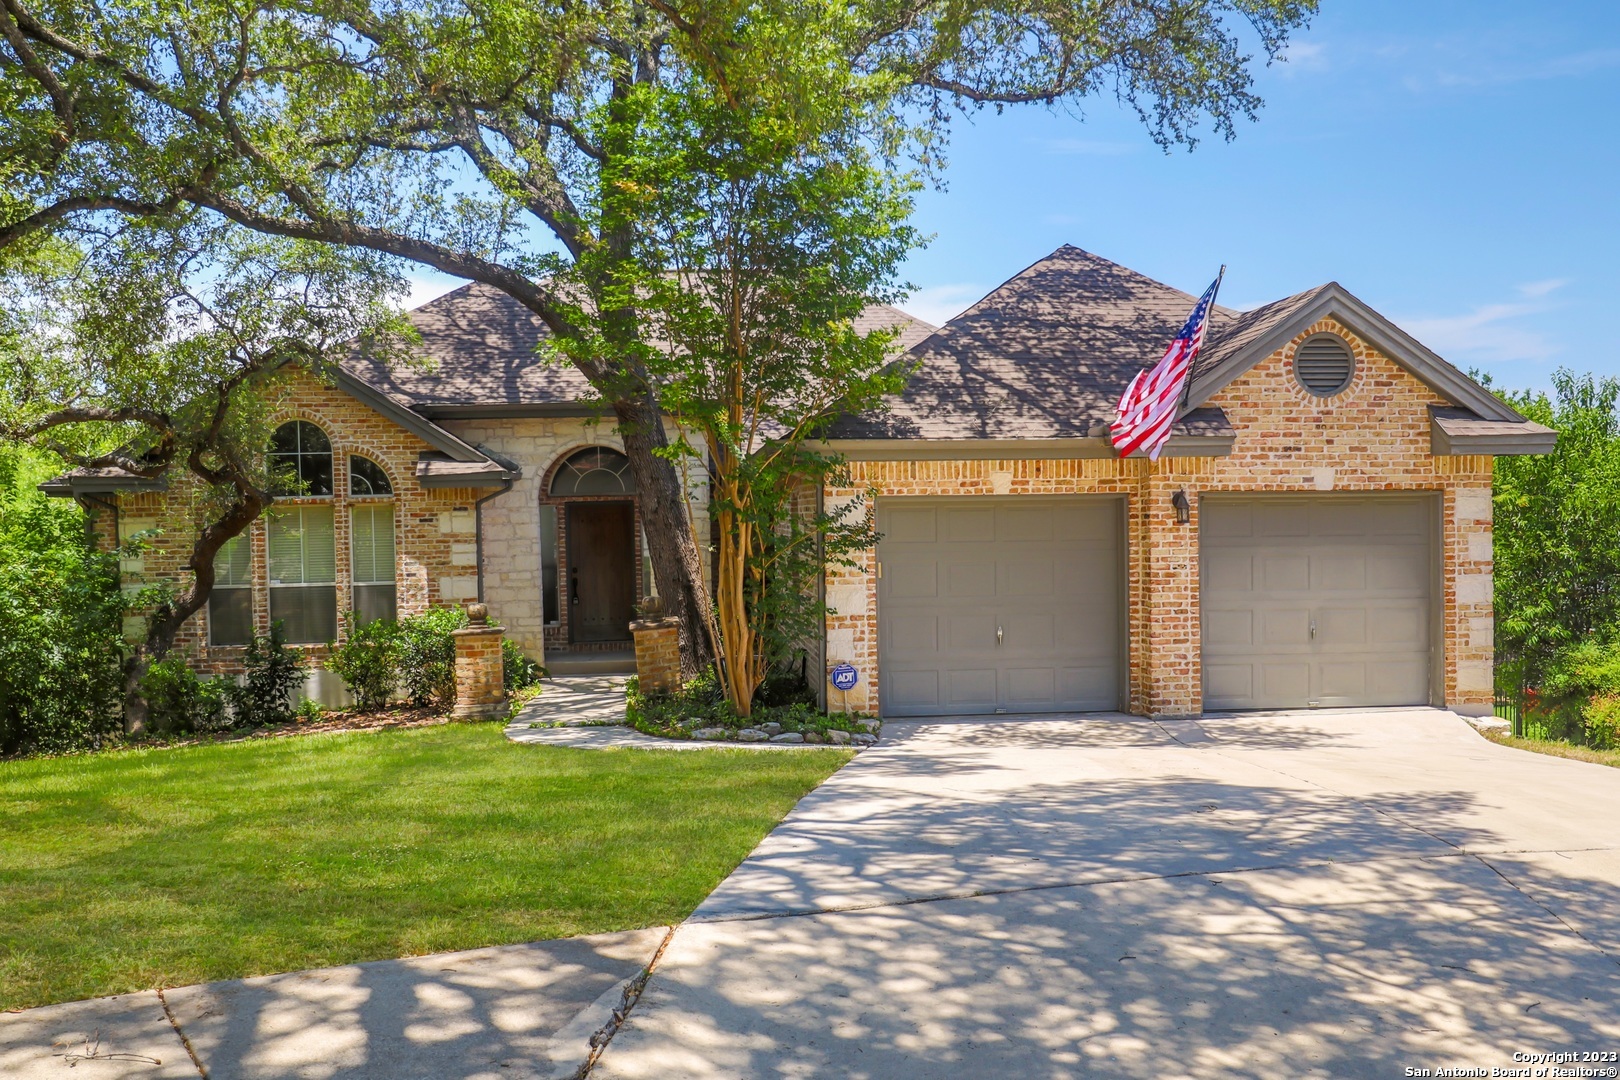 Gorgeous updated home is truly move-in ready. Nestled on a cul-de-sac in the desirable Deerfield community, this home boasts mature trees, open living and a spacious Texas-sized backyard. The owner's suite is located on the main floor complete with separate tub/shower and ample counter space. The open main living area has an abundance of natural light, a gas fireplace and access to the upstairs patio. The home has been cleaned, is freshly painted and has NEW carpet. There is an oversized laundry room, pantry and mud room with a utility sink. Secondary bedrooms are located downstairs. There is an additional living area (downstairs) that can easily serve as a 4th bedroom or in-law dwelling. It opens to the covered patio and sprawling manicured backyard. Schedule your showing TODAY!